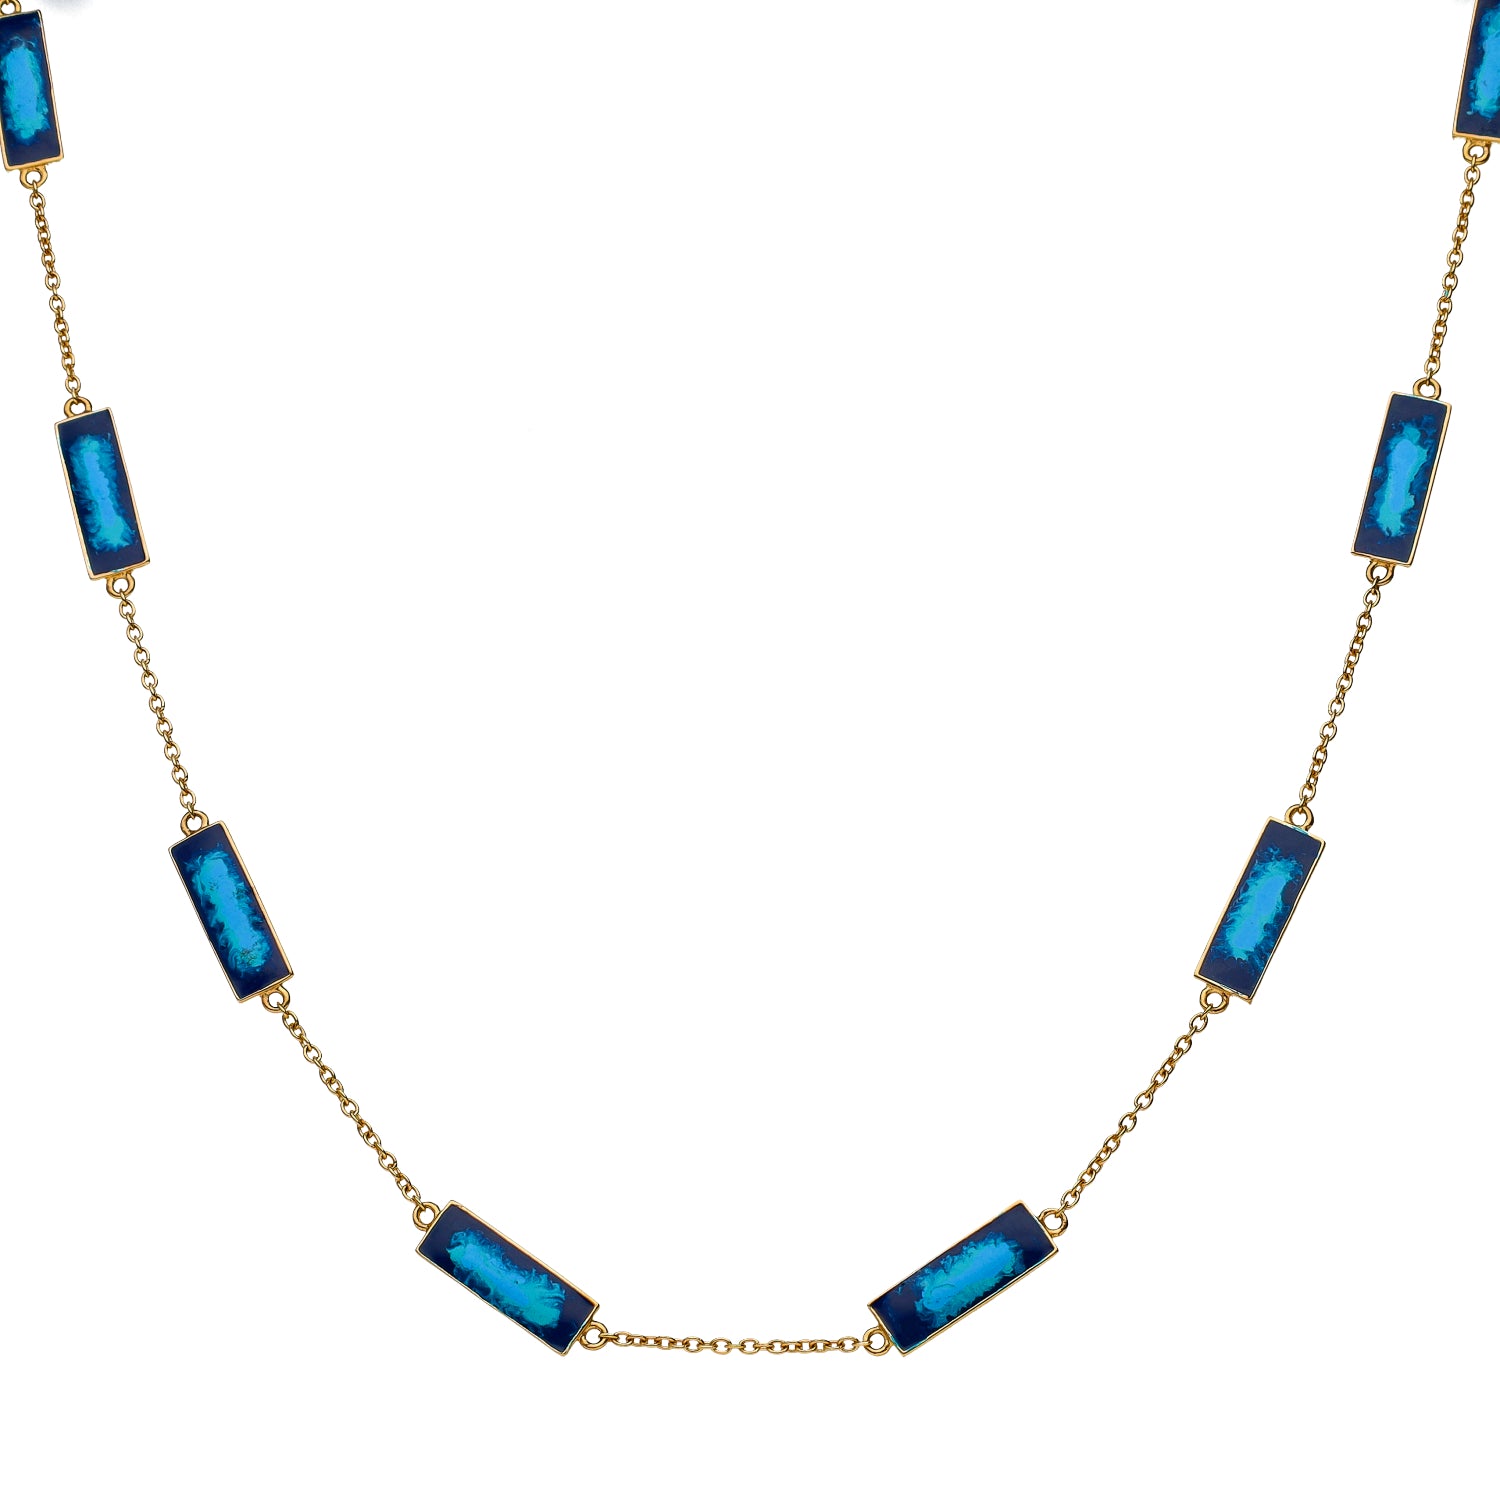 Martha Seely Designs 14K Yellow Gold Hand Painted Blue Enamel Stations 18" Necklace